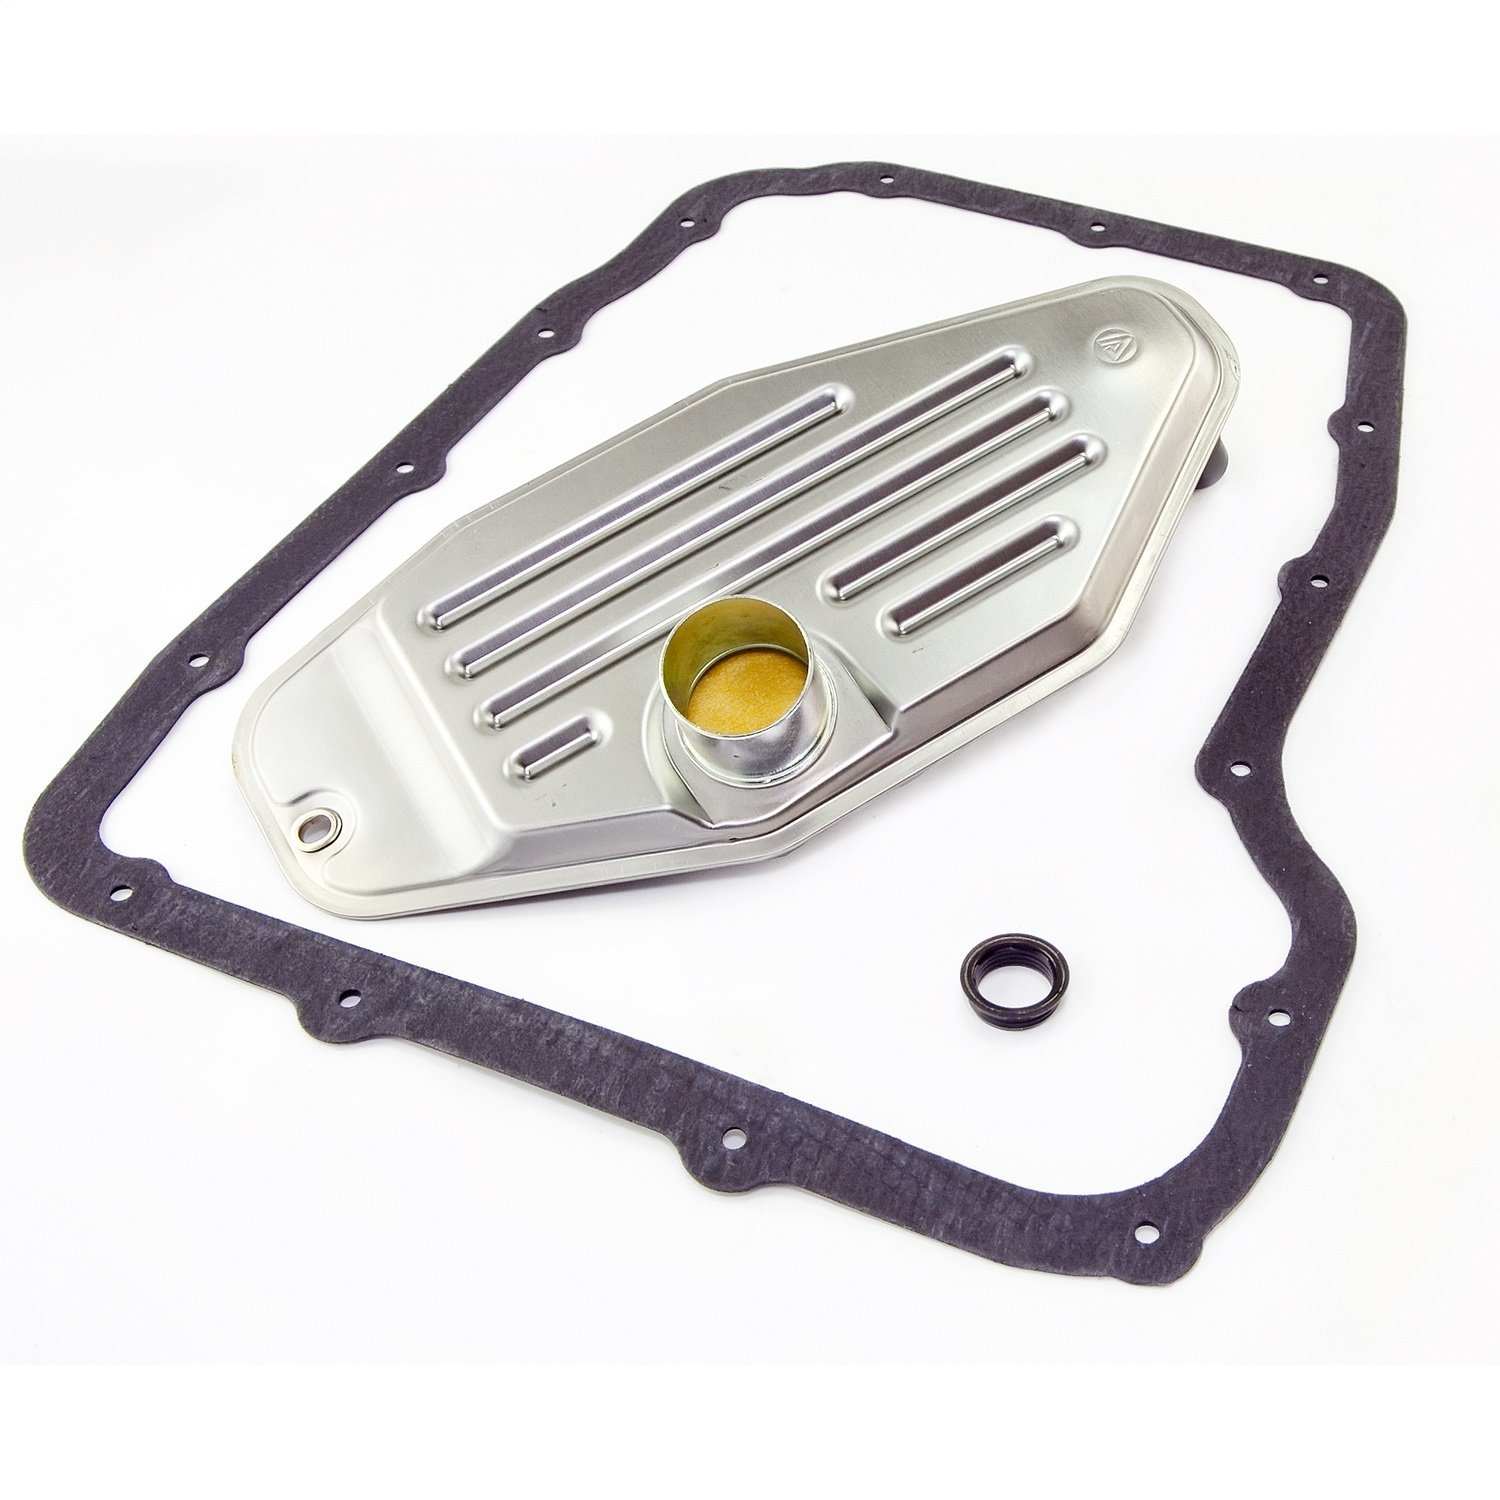 This automatic transmission filter from Omix-ADA fits the 45RFE transmission found in 99-04 4WD Jeep